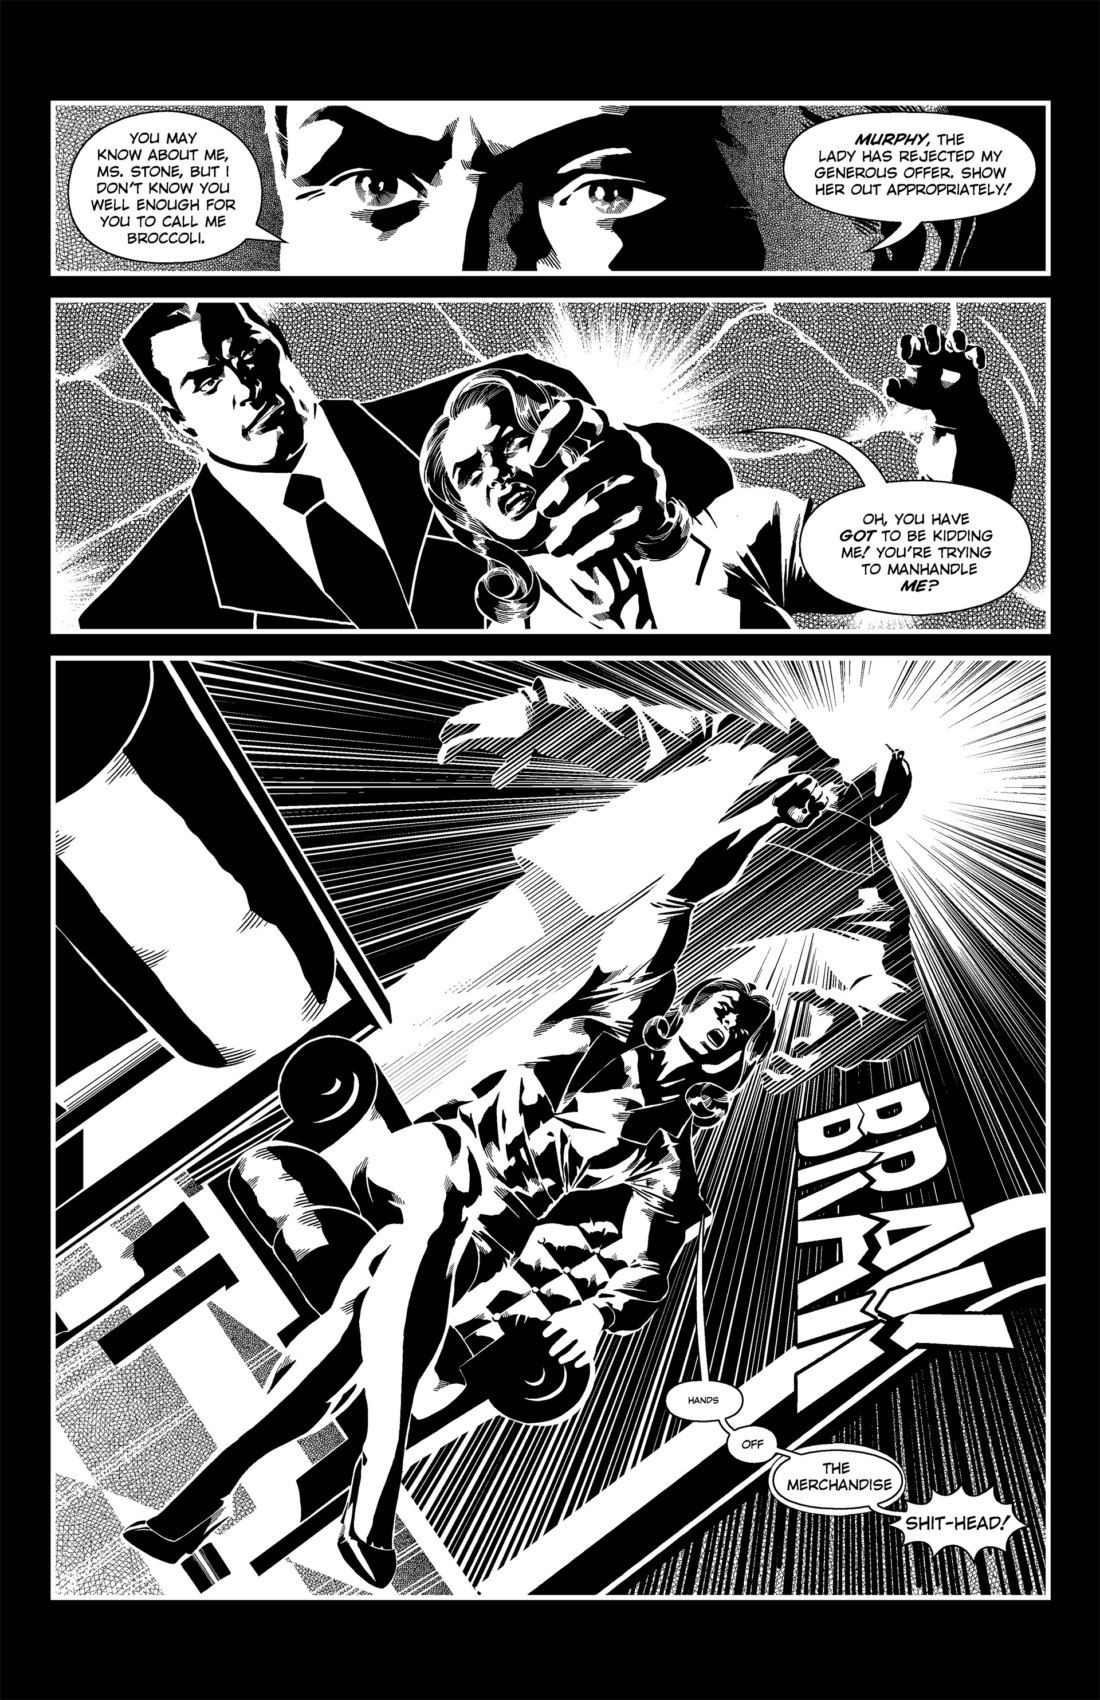 Stone Cold Issue 1 MuscleFan page 19